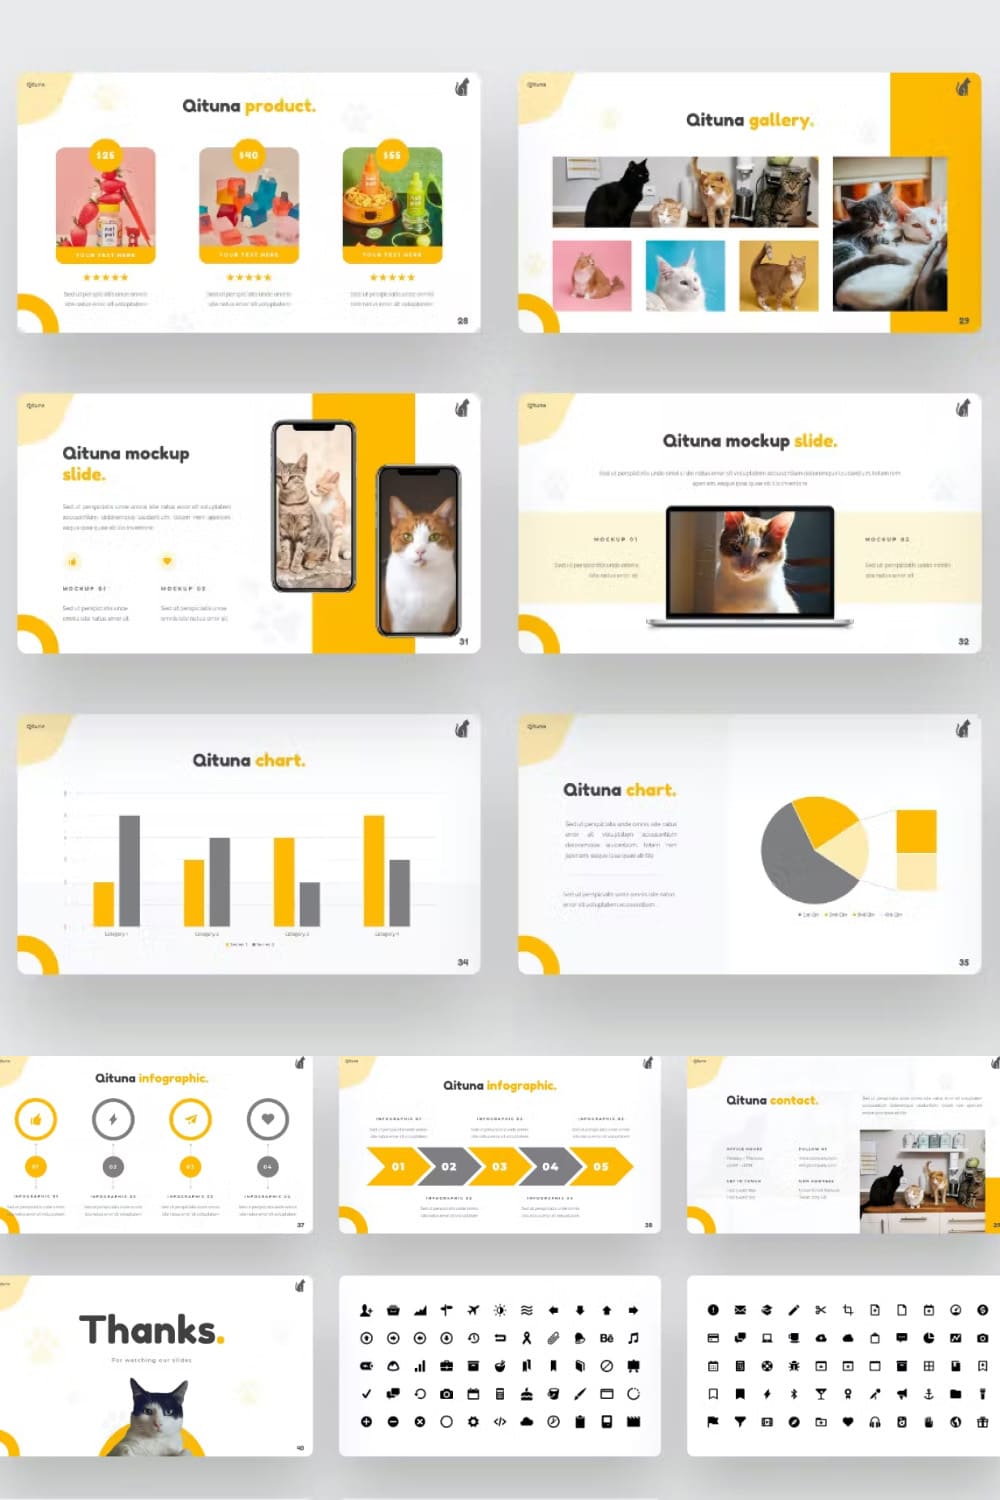 This Presentation Template can be used for any variety of purposes.